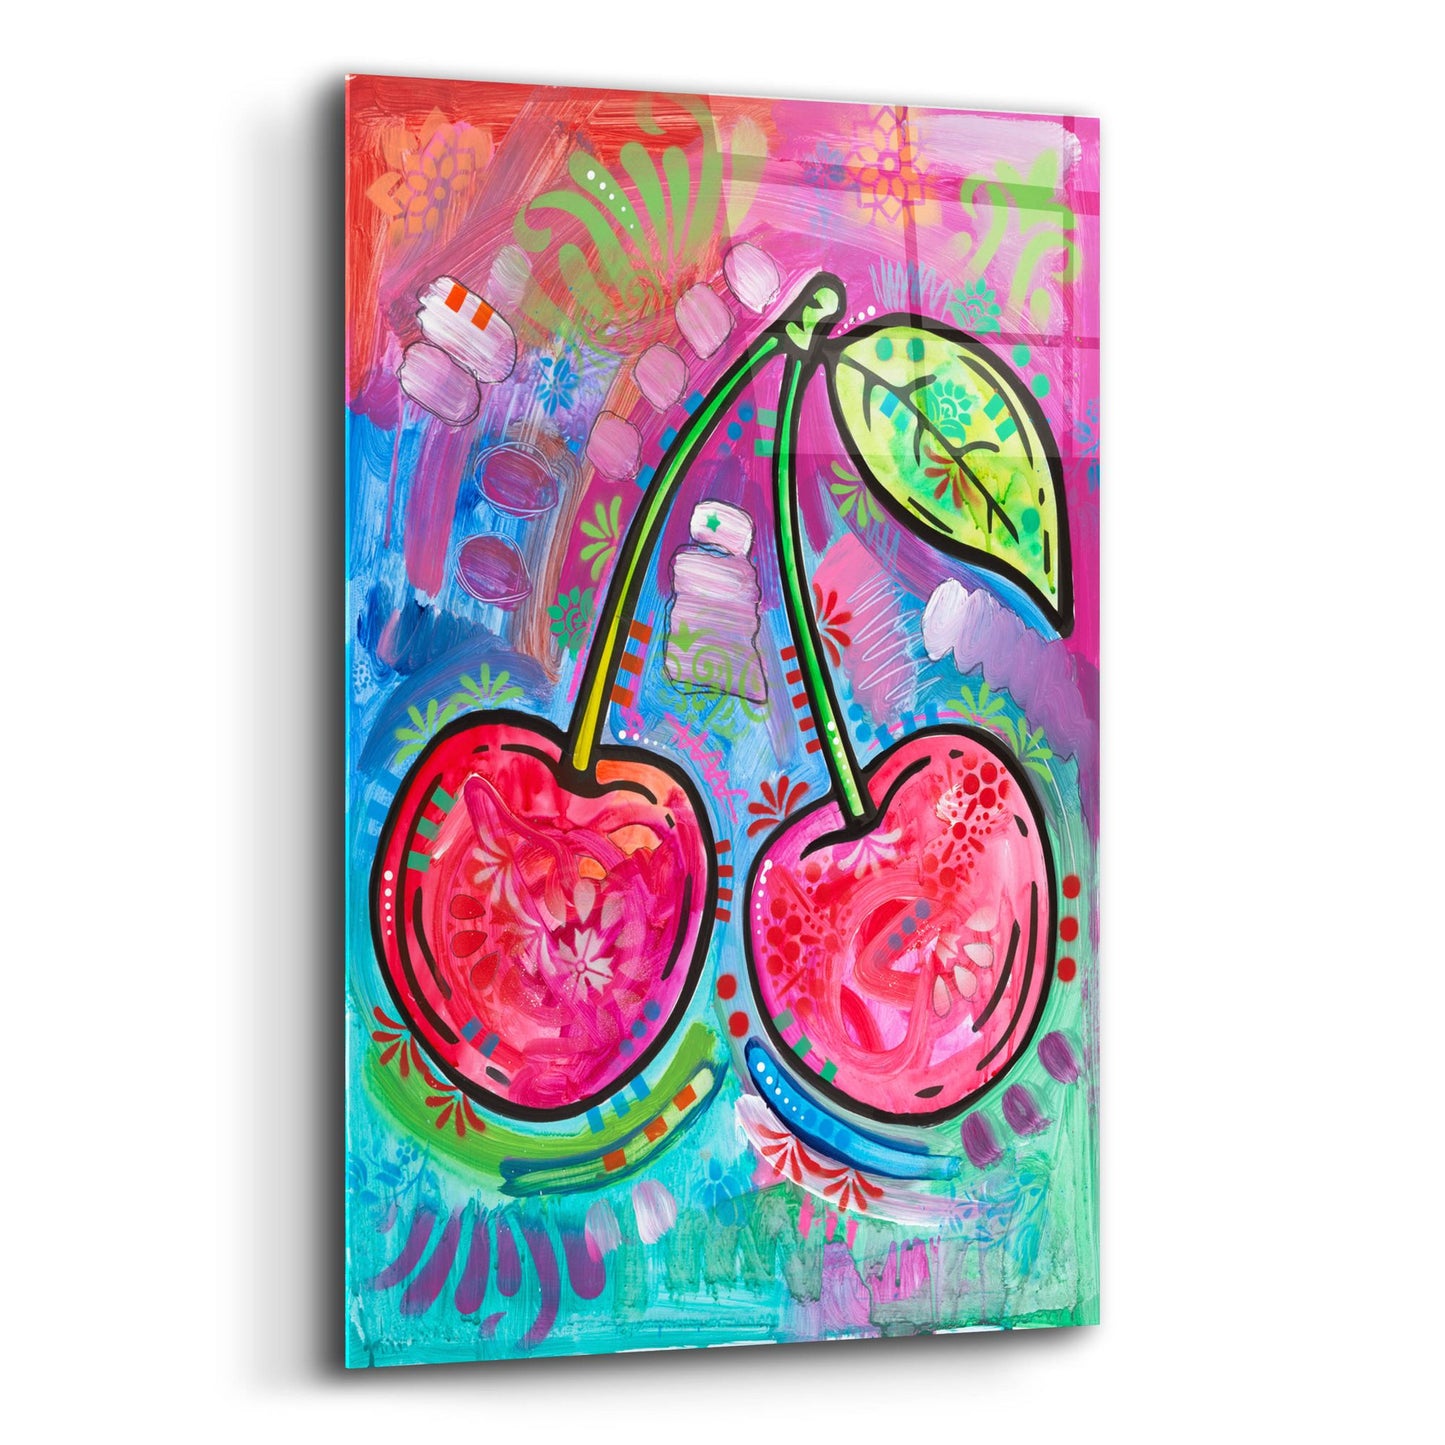 Epic Art 'Cherry Time' by Dean Russo, Acrylic Glass Wall Art,12x16